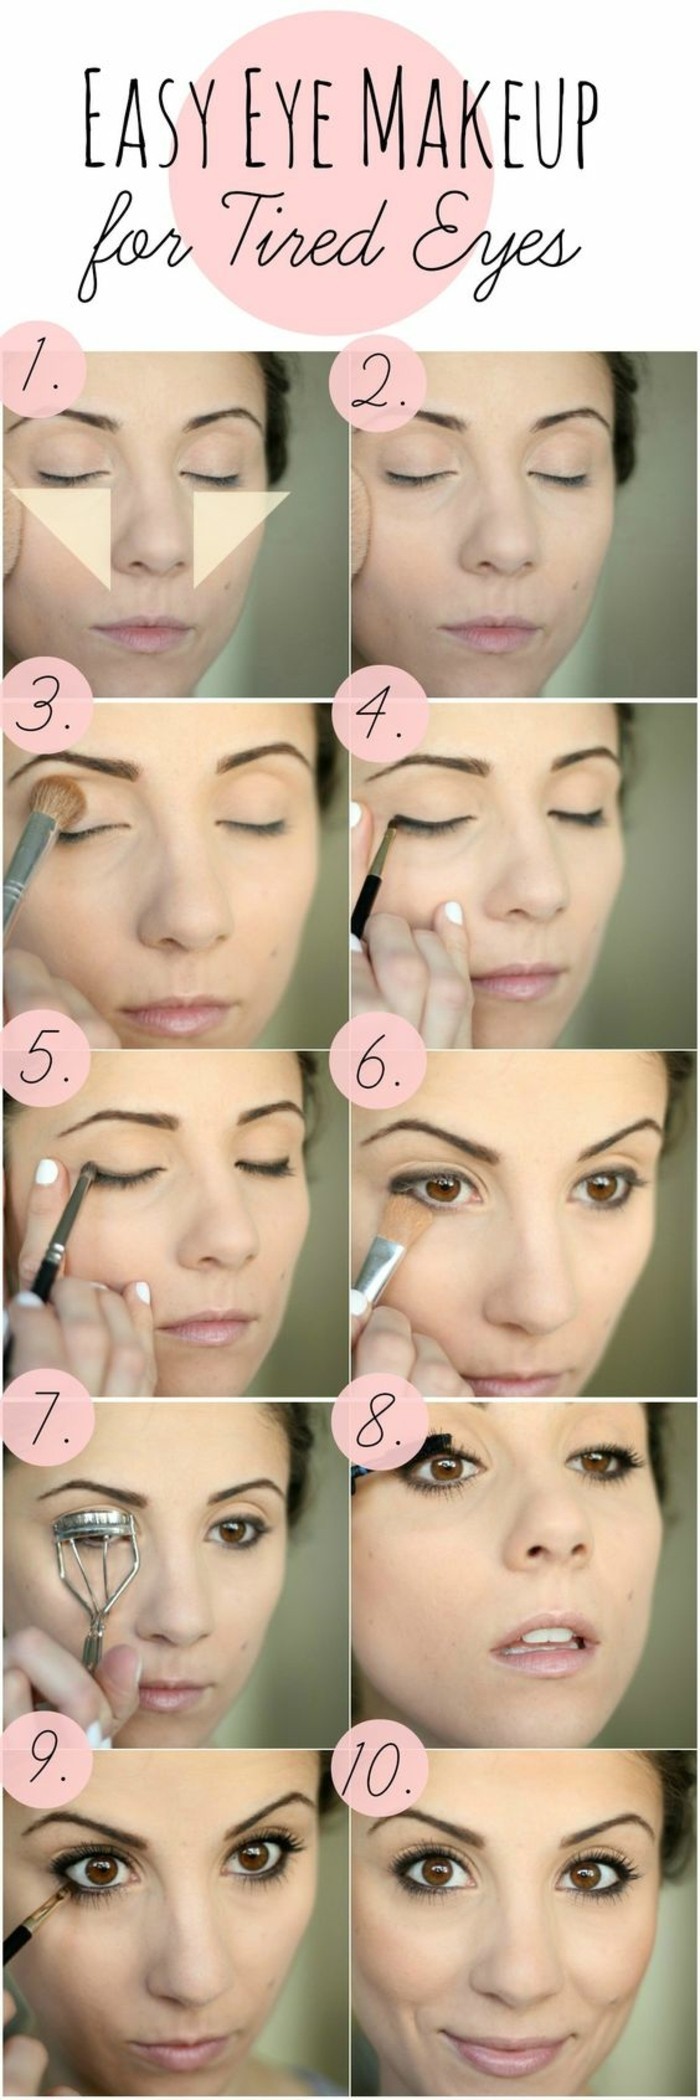 000-tuto-maquillage-yeux-marrons-nos-idees-pour-un-maquillage-chic-maquillage-année-60